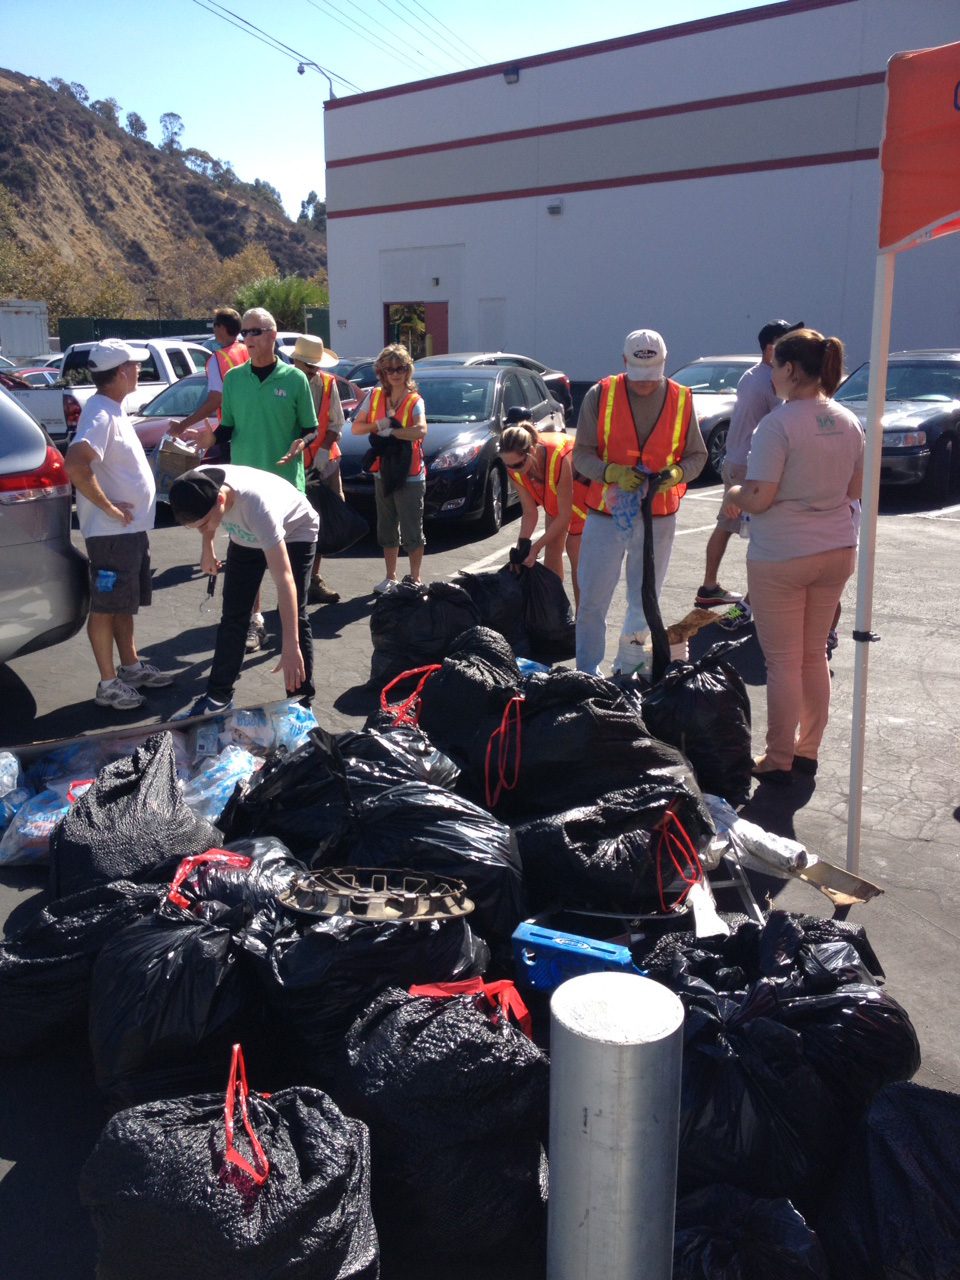 The results! Thanks to our 134 volunteers who cleaned up 750 pounds of trash and 158 pounds of recycling!